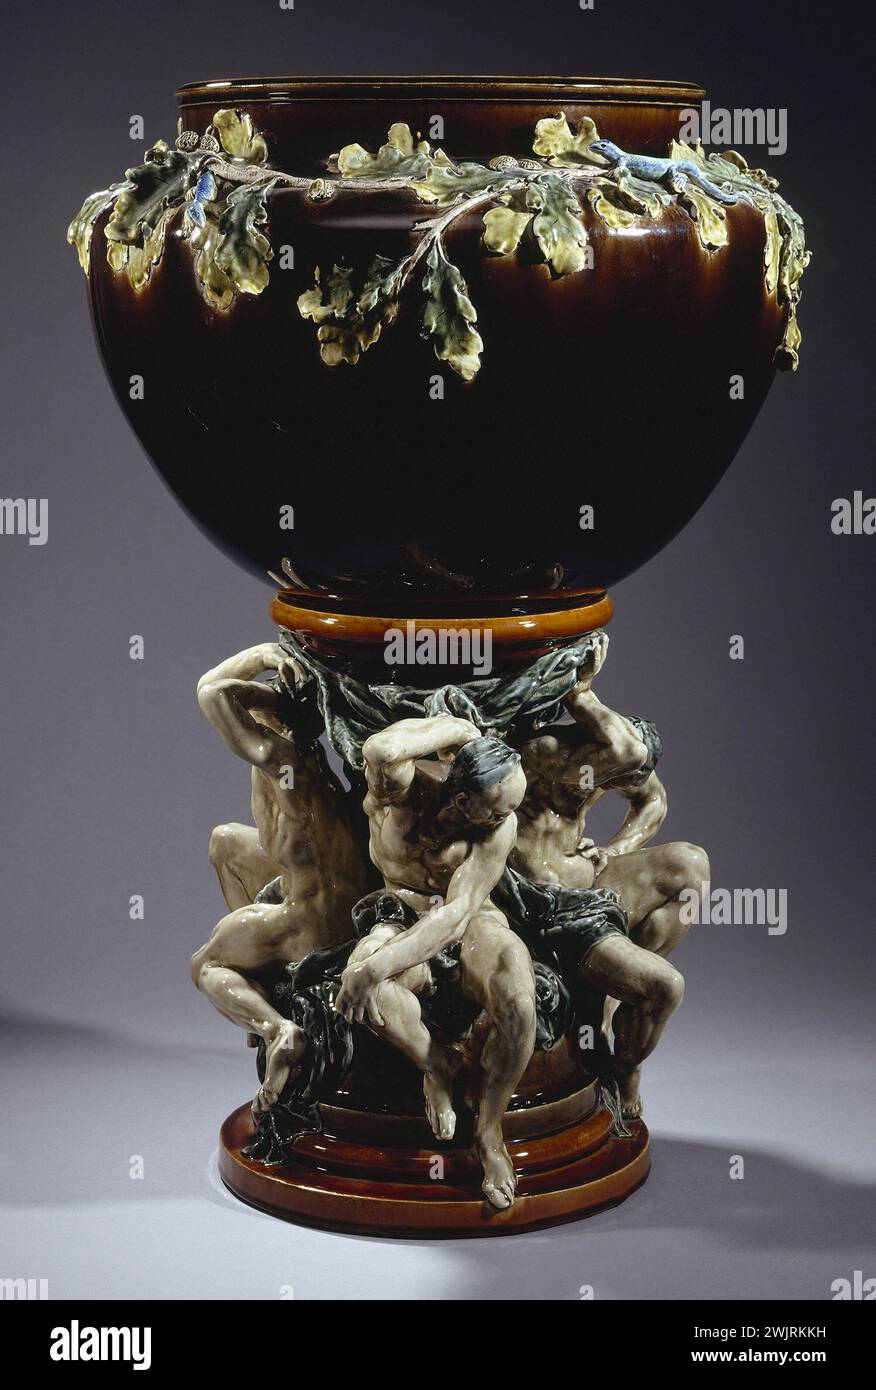 Carrier-Belleuse (Albert-Ernest Carrier de Belleuse, 1824-1887) and Auguste Rodin (1840-1917). 'Titans vase: Overview of the pot holder decorated with branches of oak leaves and lizard and its base decorated with four Atlanteans, in enameled ceramic, last quarter of the 19th century'. Ceramics and enamel, Manufacture de Choisy-le-Roi. Museum of Fine Arts of the City of Paris, Petit Palais. 26363-14 Atlante, branch, pot, ceramic emaillee, decor, email, chene leaf, lezard, choisy-le-roi manufacture, black, decorative object, base, vase of titans, 19th XIX 19th 19th 19th 19th century, mythology Stock Photo